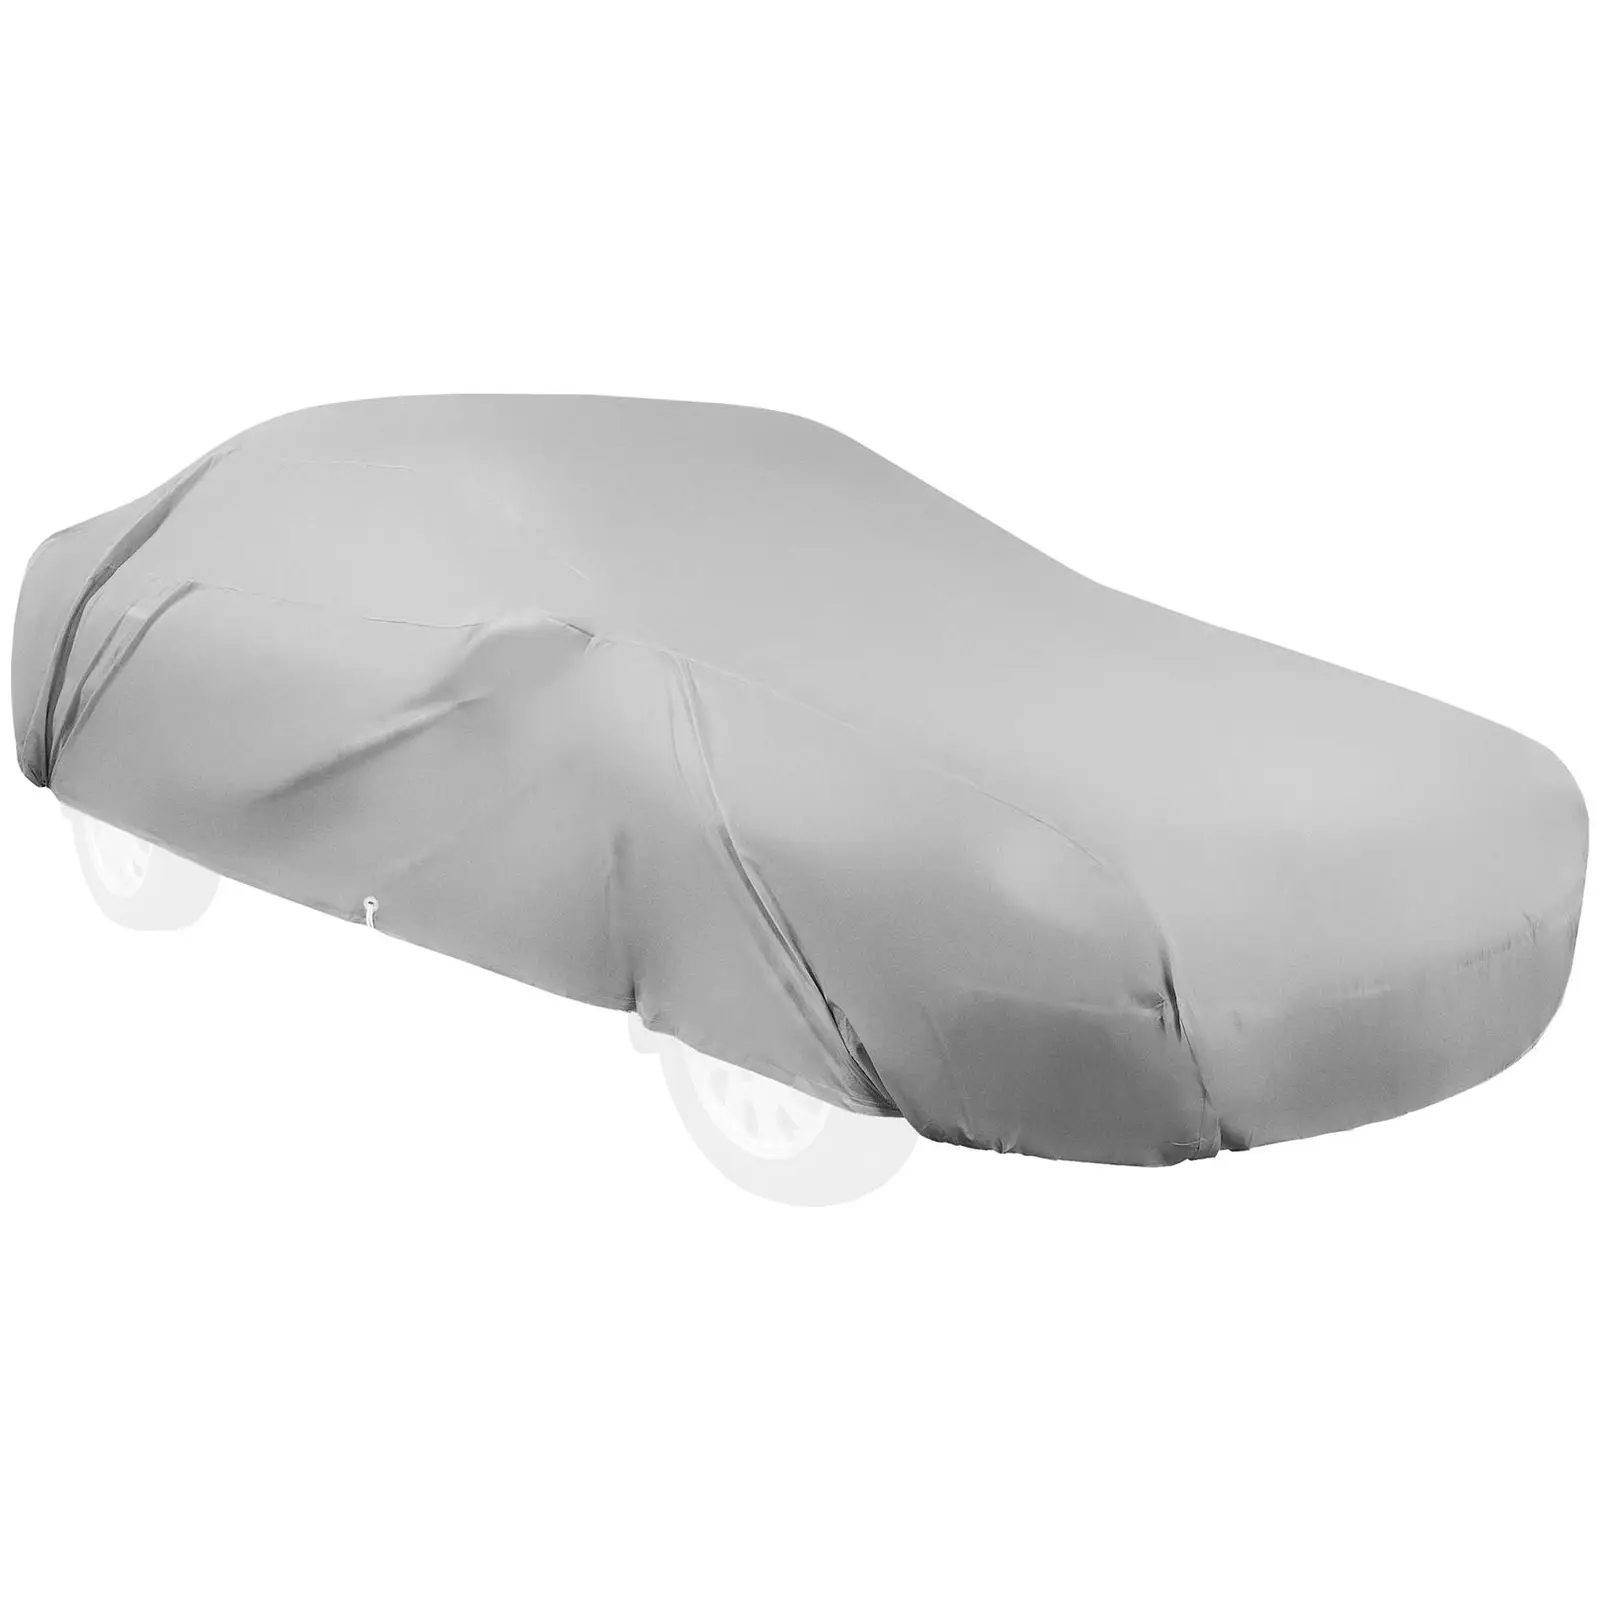 Car Cover - size M